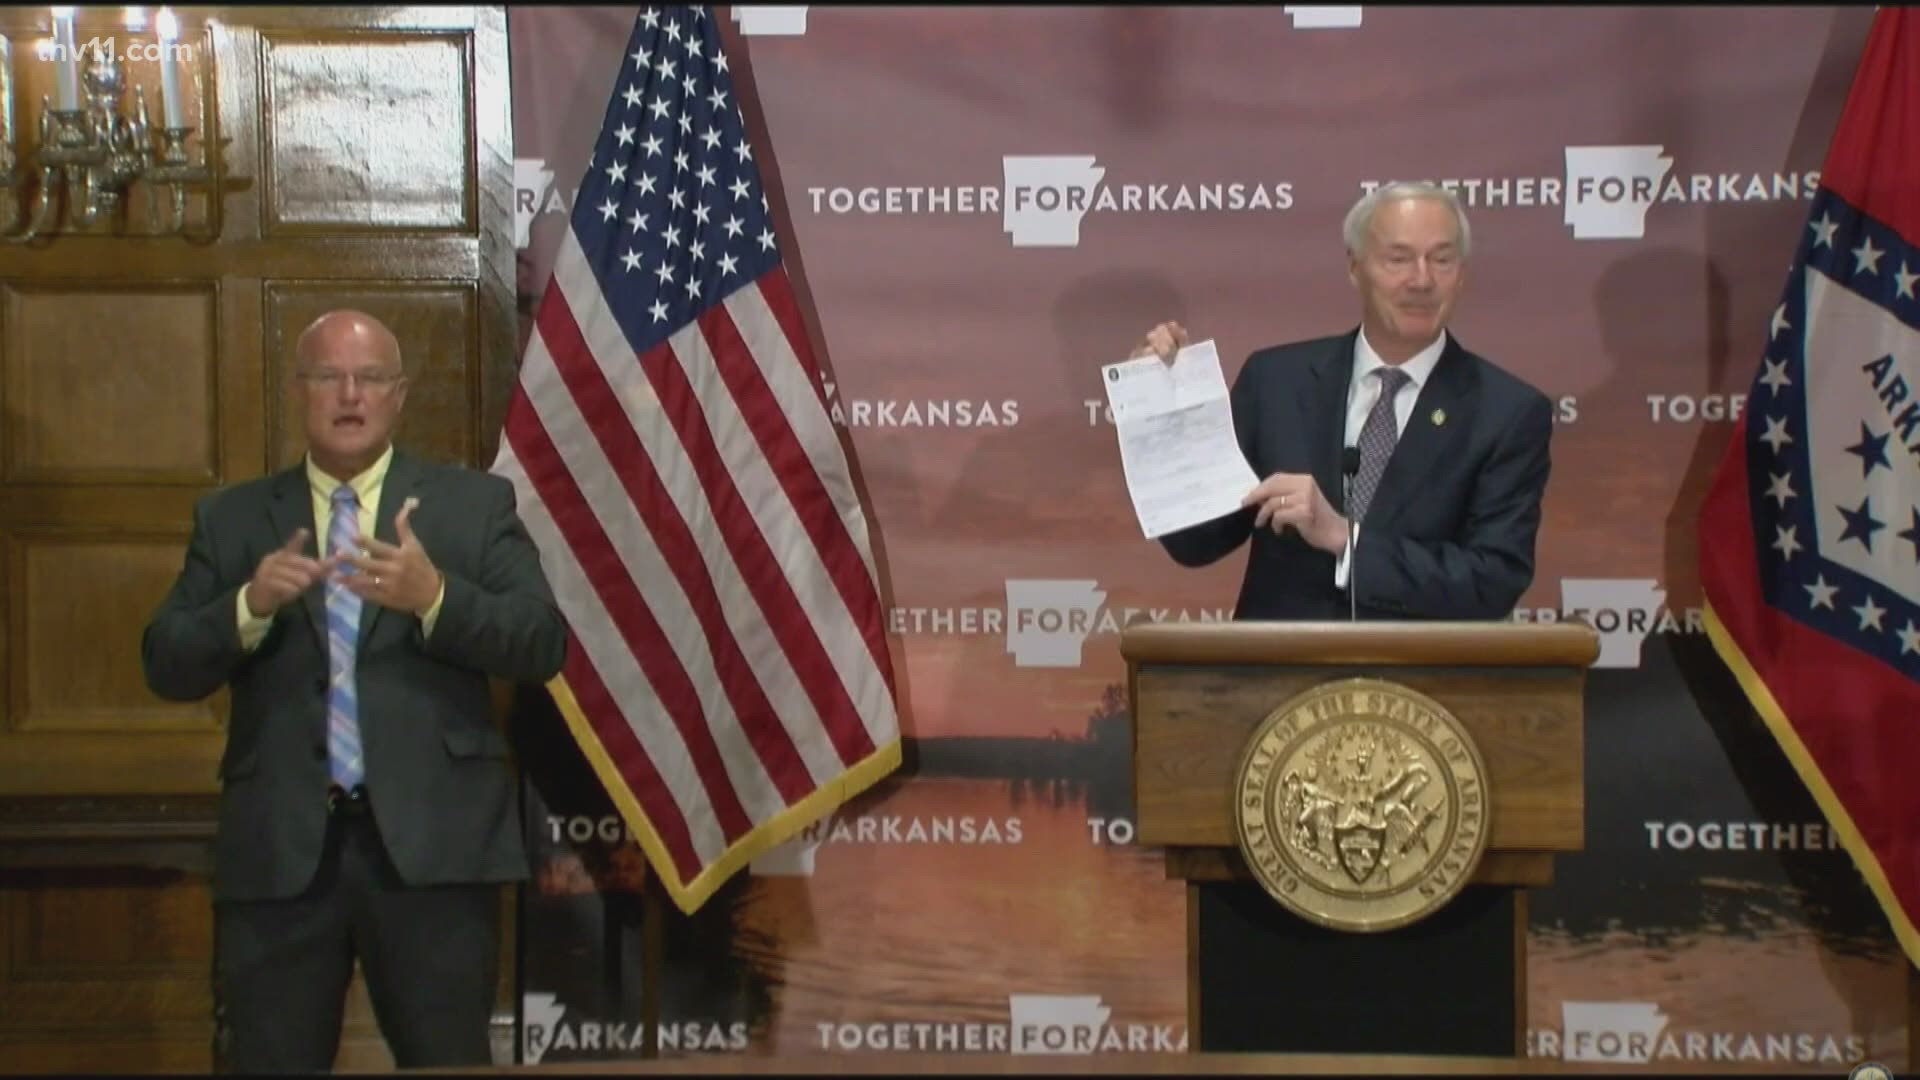 The Arkansas governor revealed that his name was used in an attempt to fraudulently claim unemployment benefits during the coronavirus pandemic.